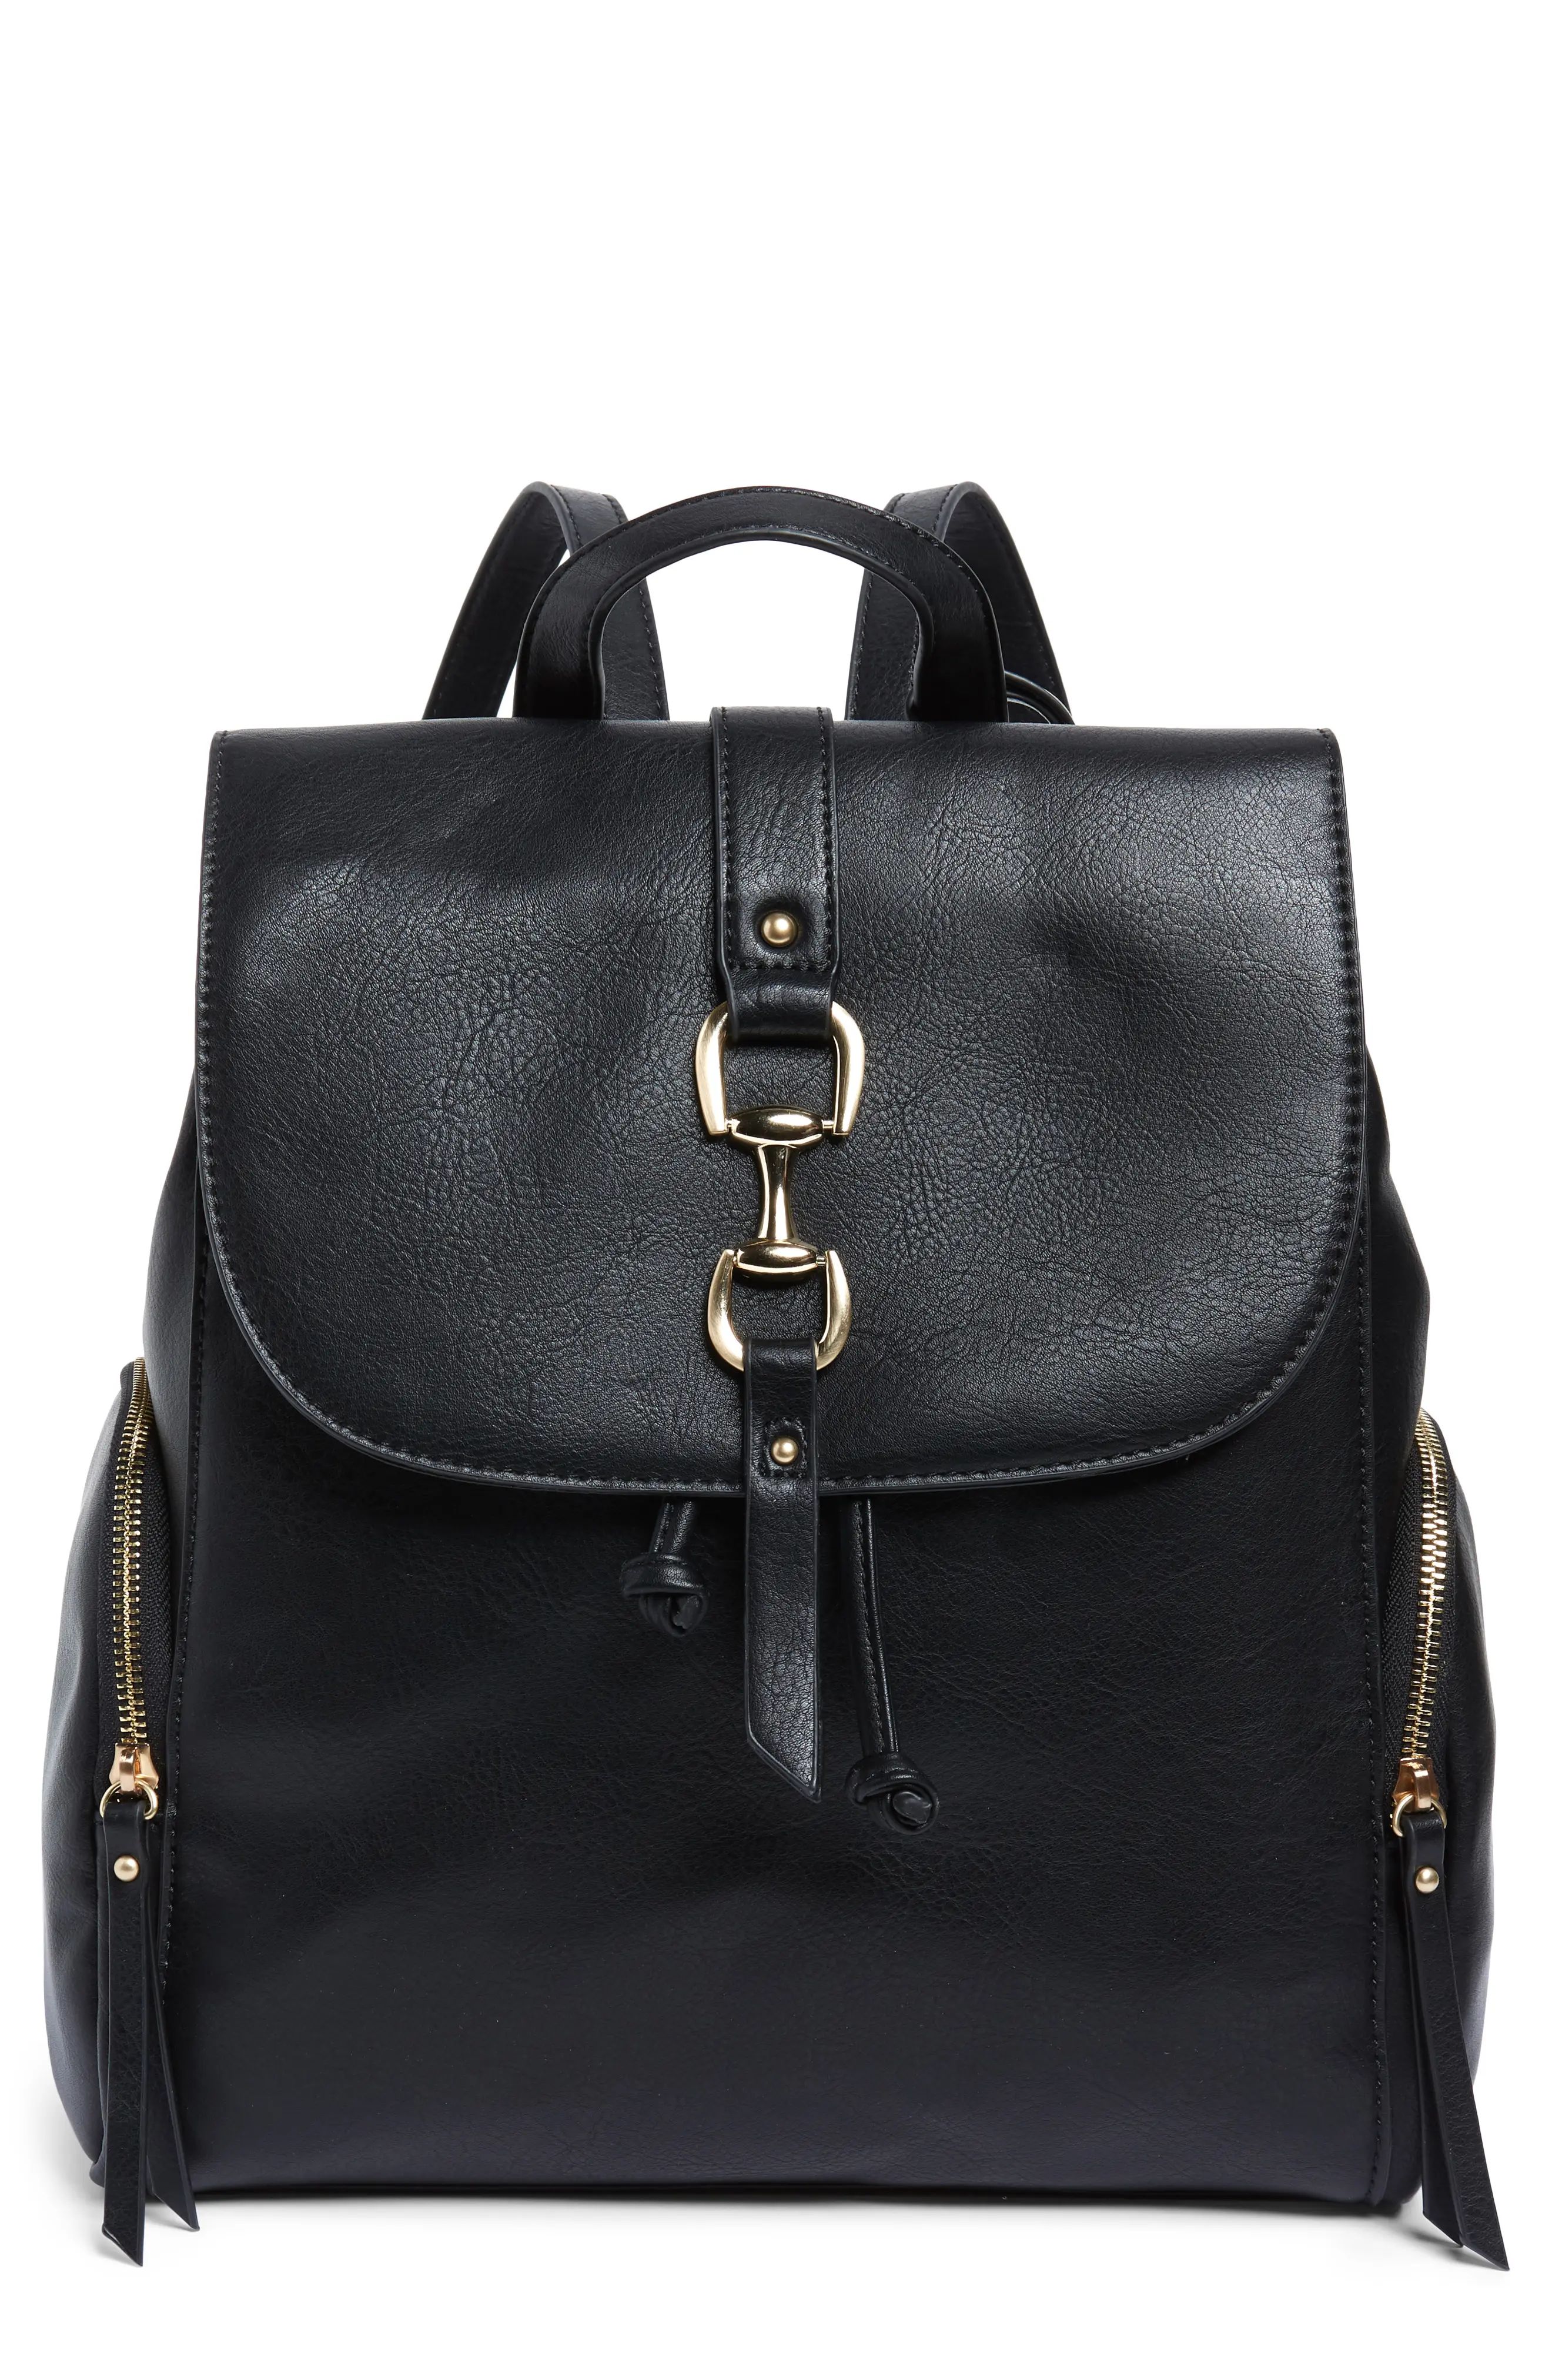 Sole Society Marah Faux Leather Backpack - Black | Nordstrom